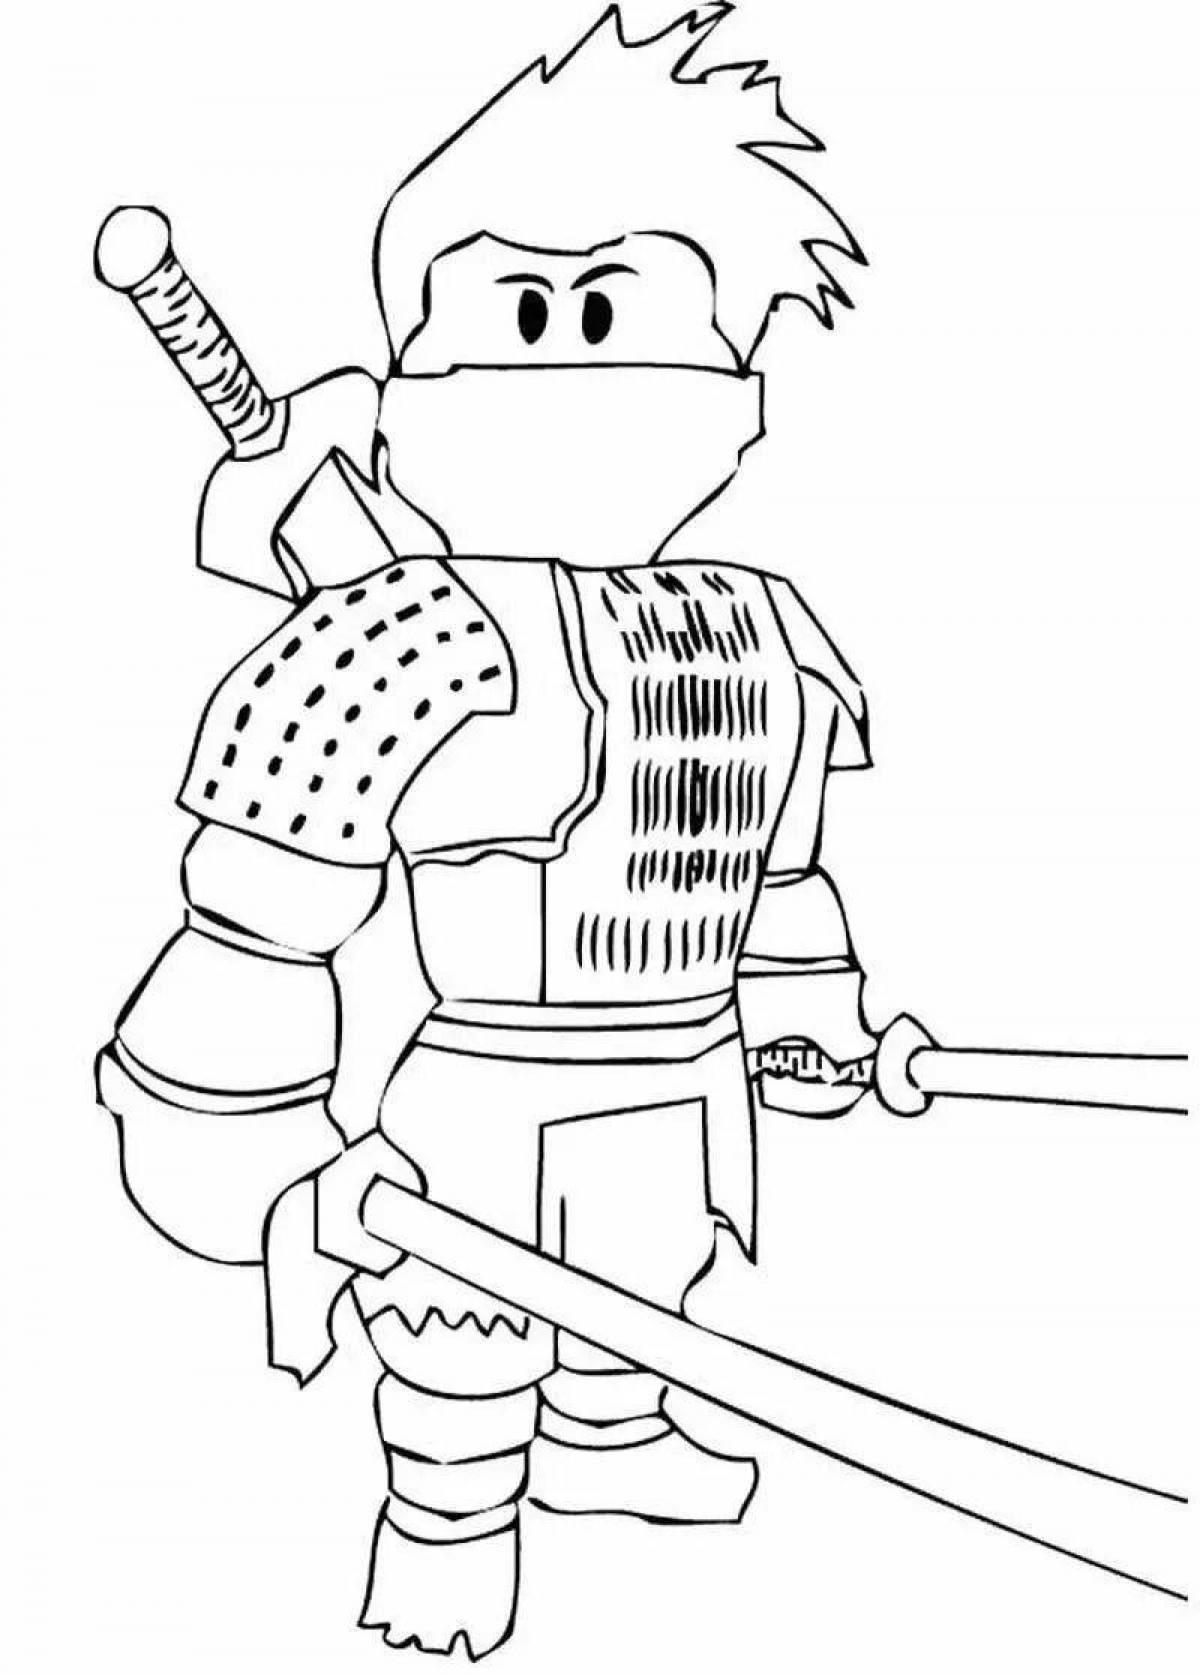 Charming roblox characters coloring page